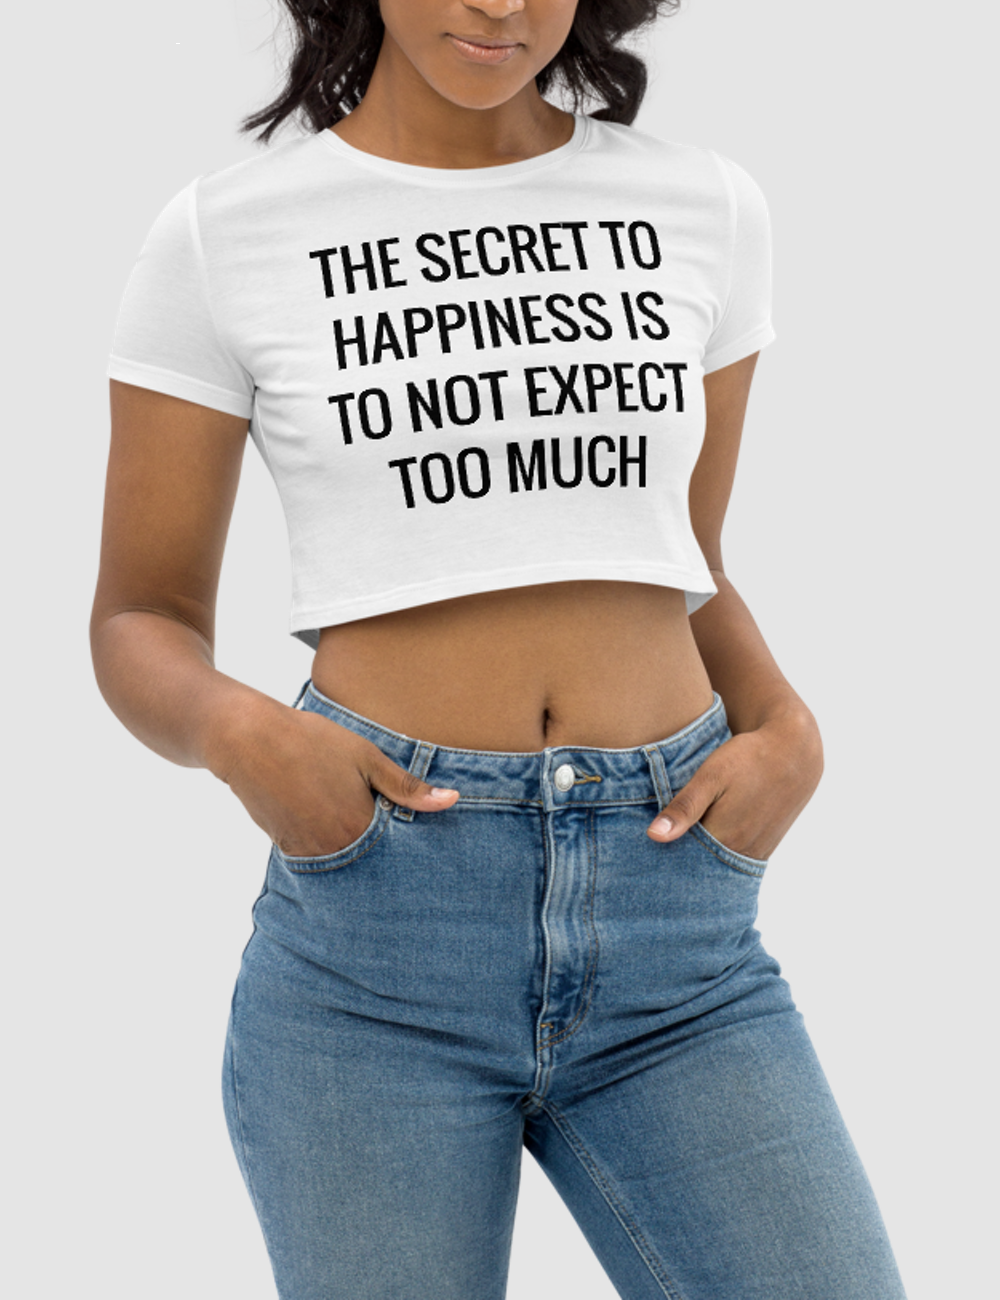 The Secret To Happiness Is To Not Expect Too Much | Women's Crop Top T-Shirt OniTakai